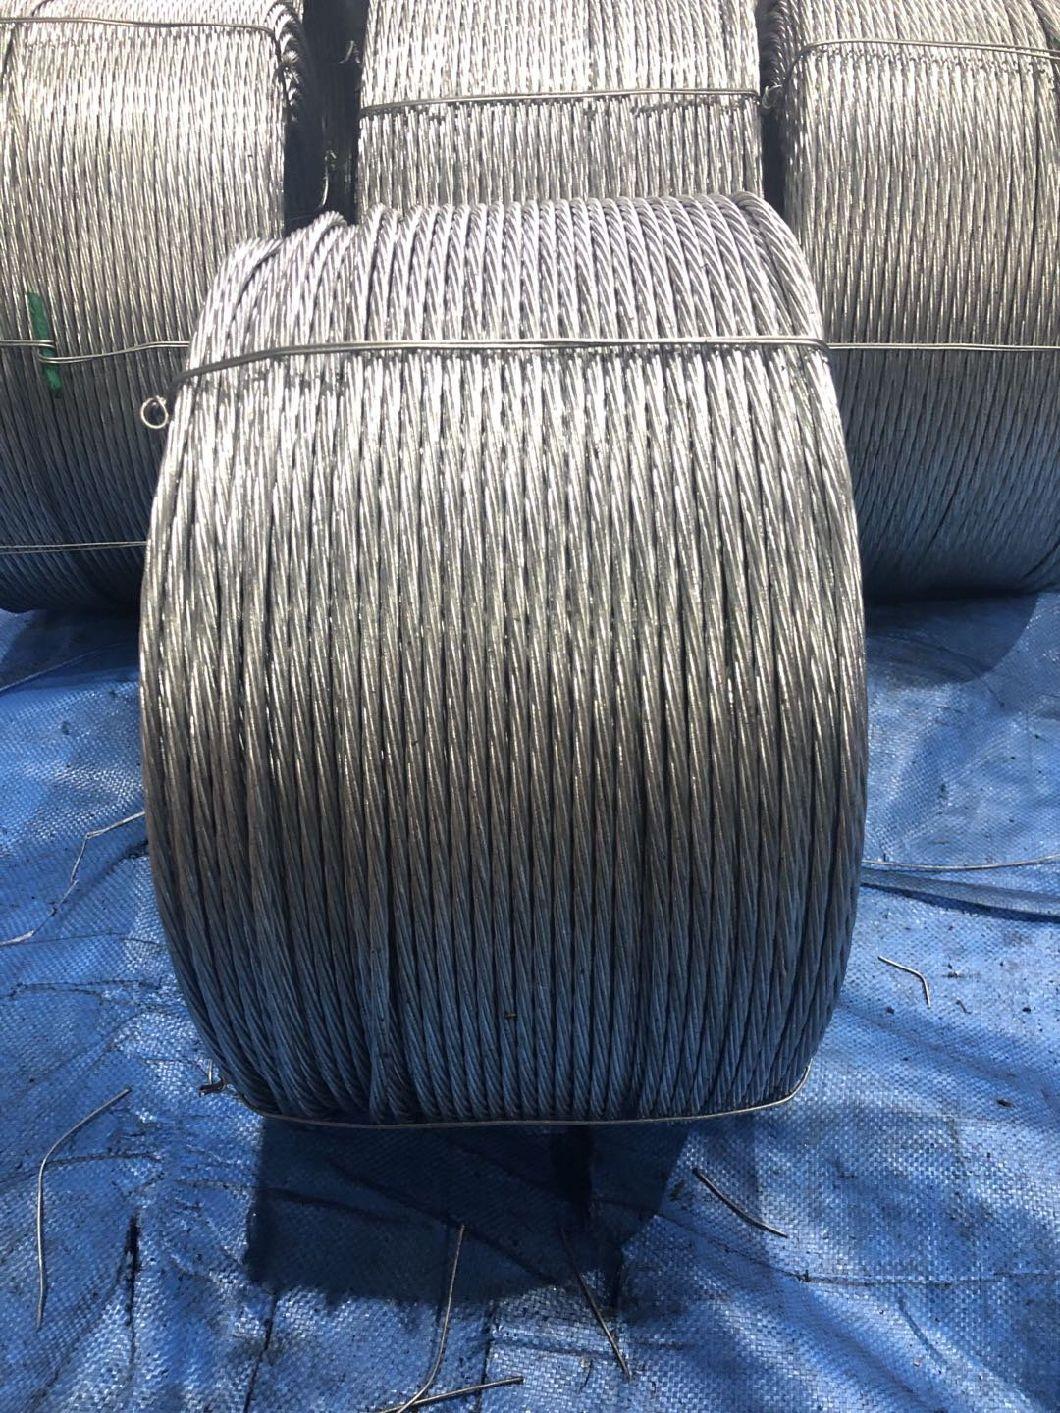 7 Strand 2.64mm Stay Wire Steel Galvanised 7/12 Swg